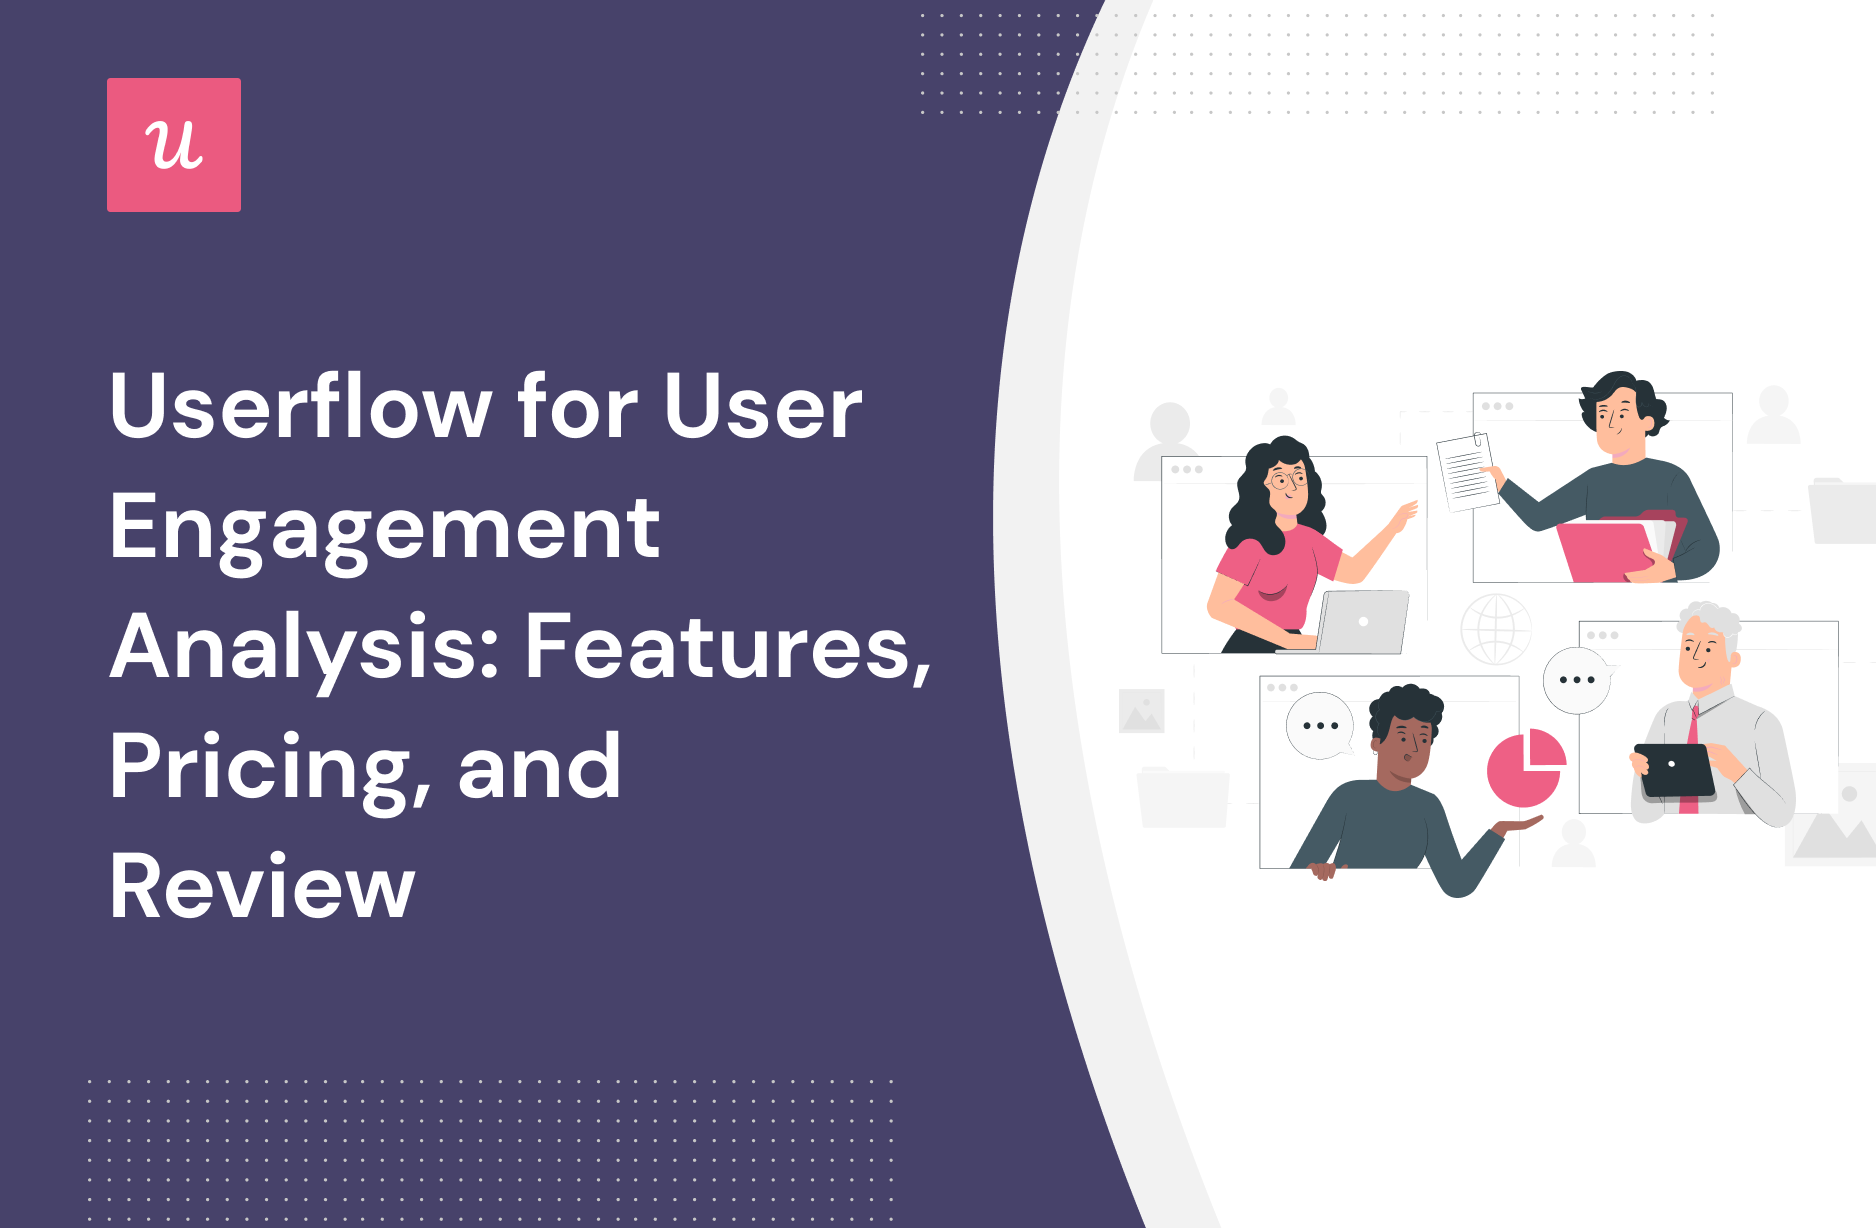 Userflow for User Engagement Analysis: Features, Pricing, and Review